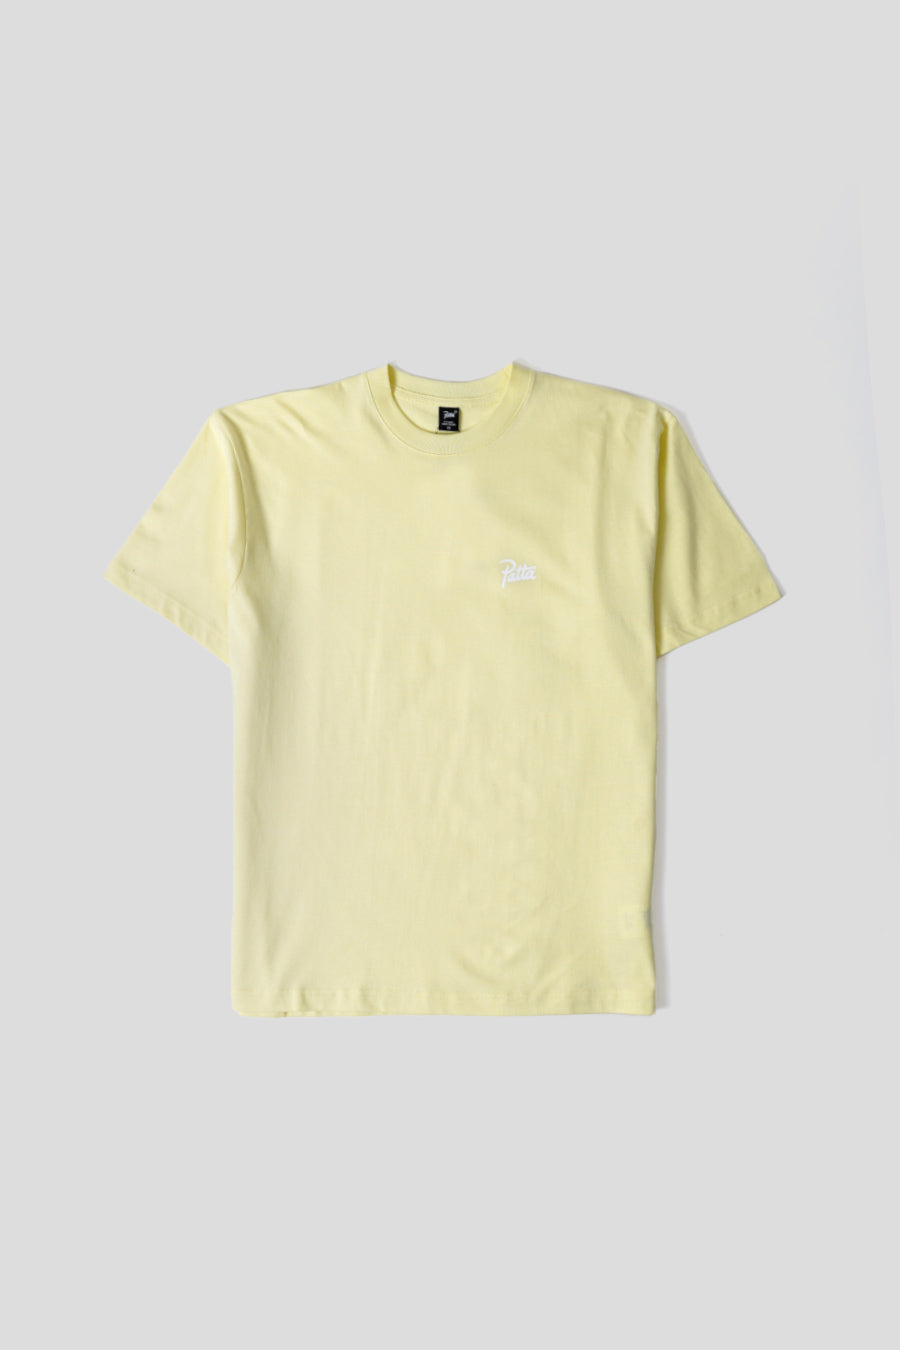 Patta - WAX YELLOW SOME LIKE IS HOT T-SHIRT  - LE LABO STORE